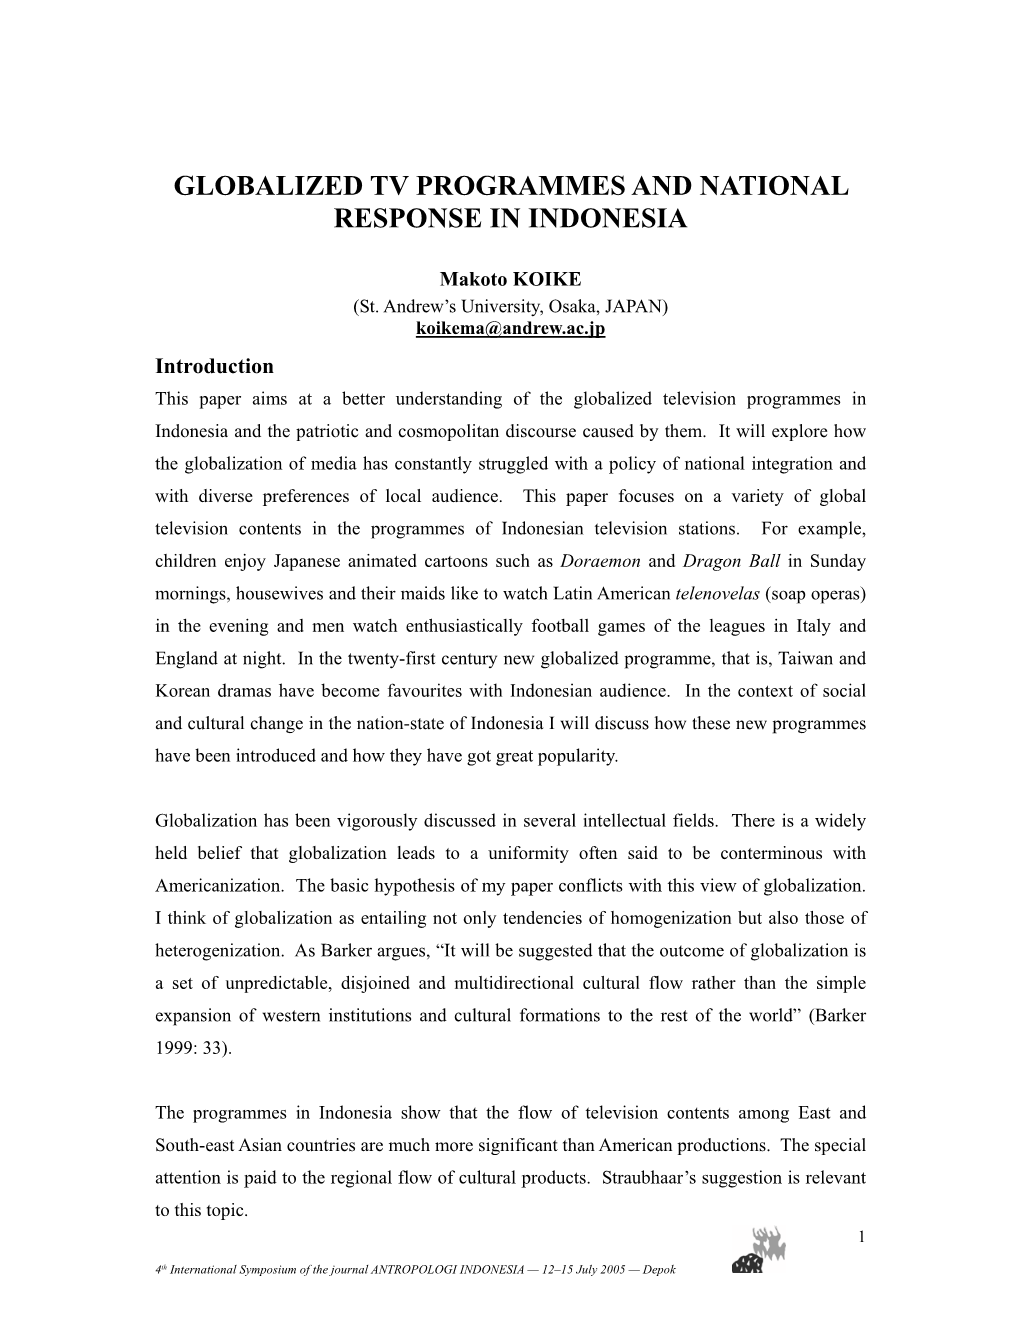 006. Globalized TV Programmes and National Response in Indonesia